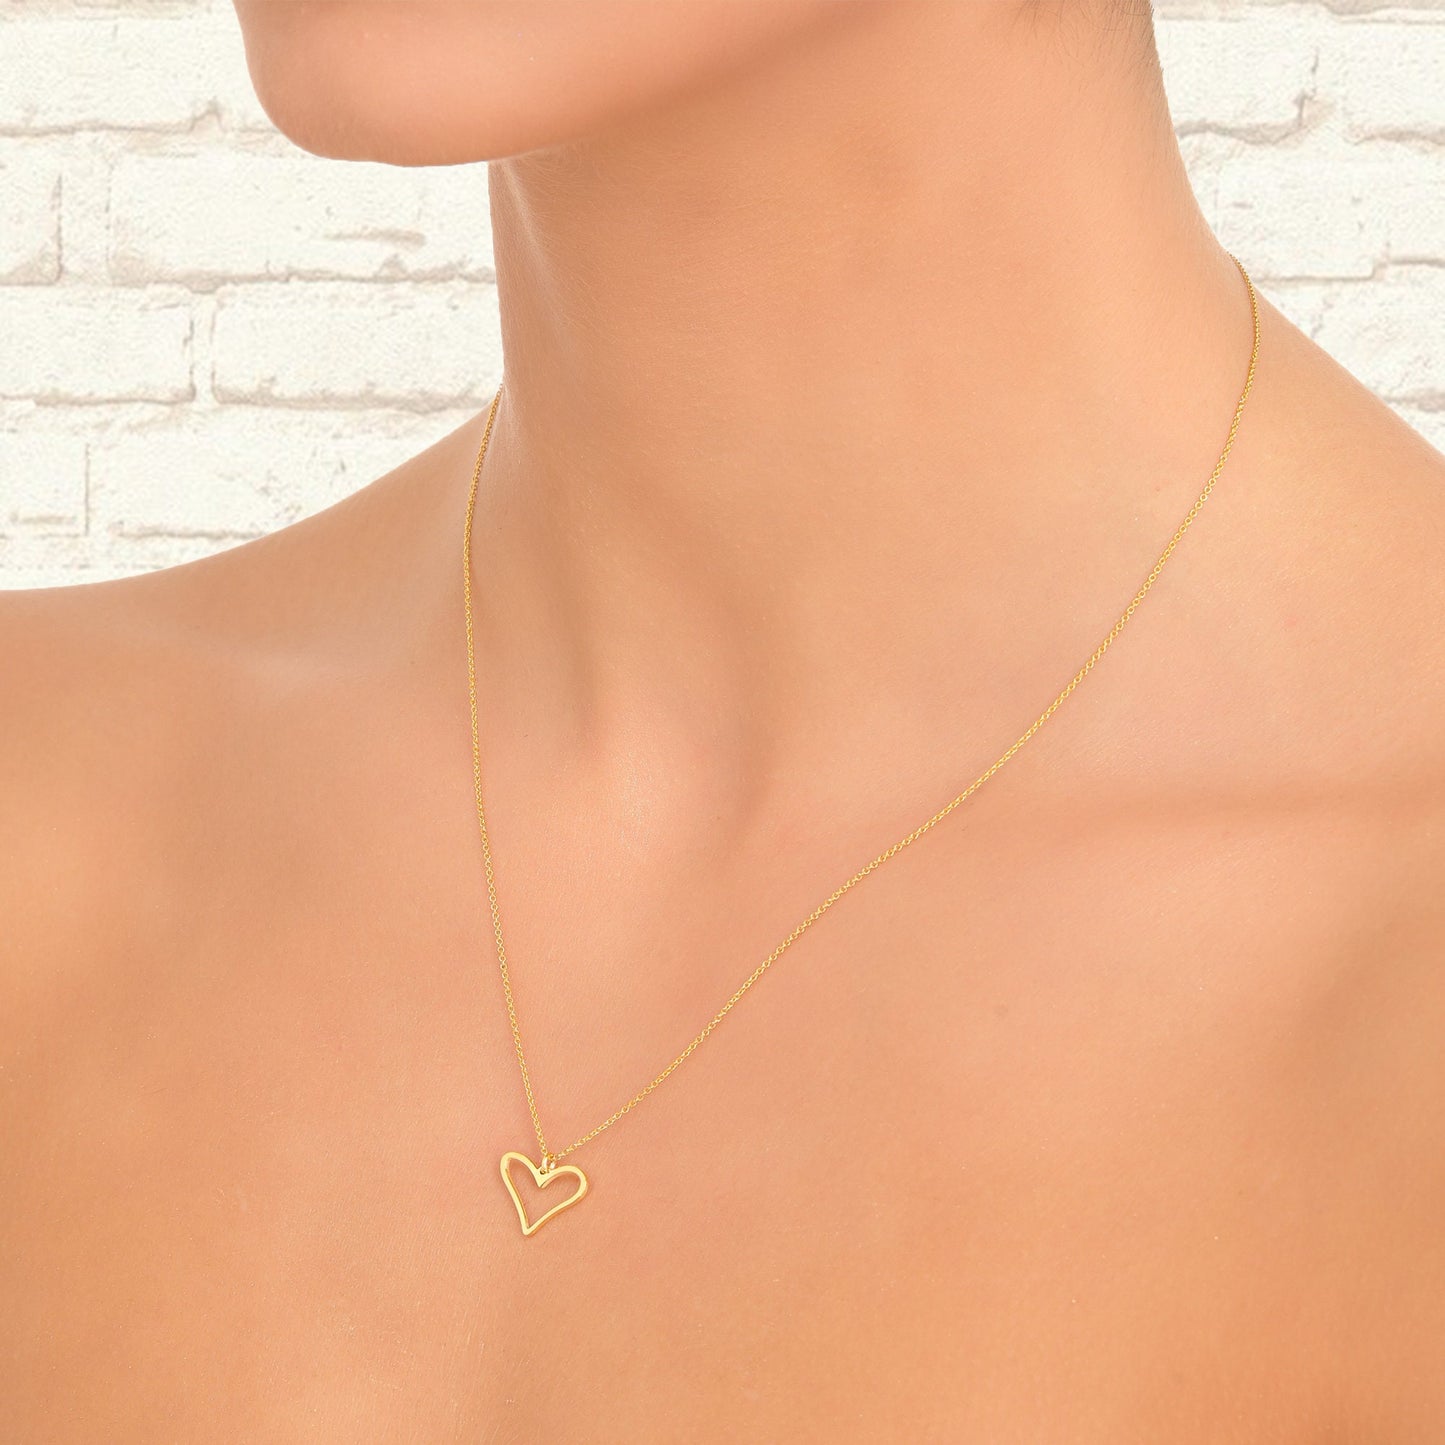 Gold Heart Necklace, Open Heart Pendant, 14K Solid Gold Layering Chain, Minimalist Jewelry, Gift for Her, necklaces for women gold Jewelry